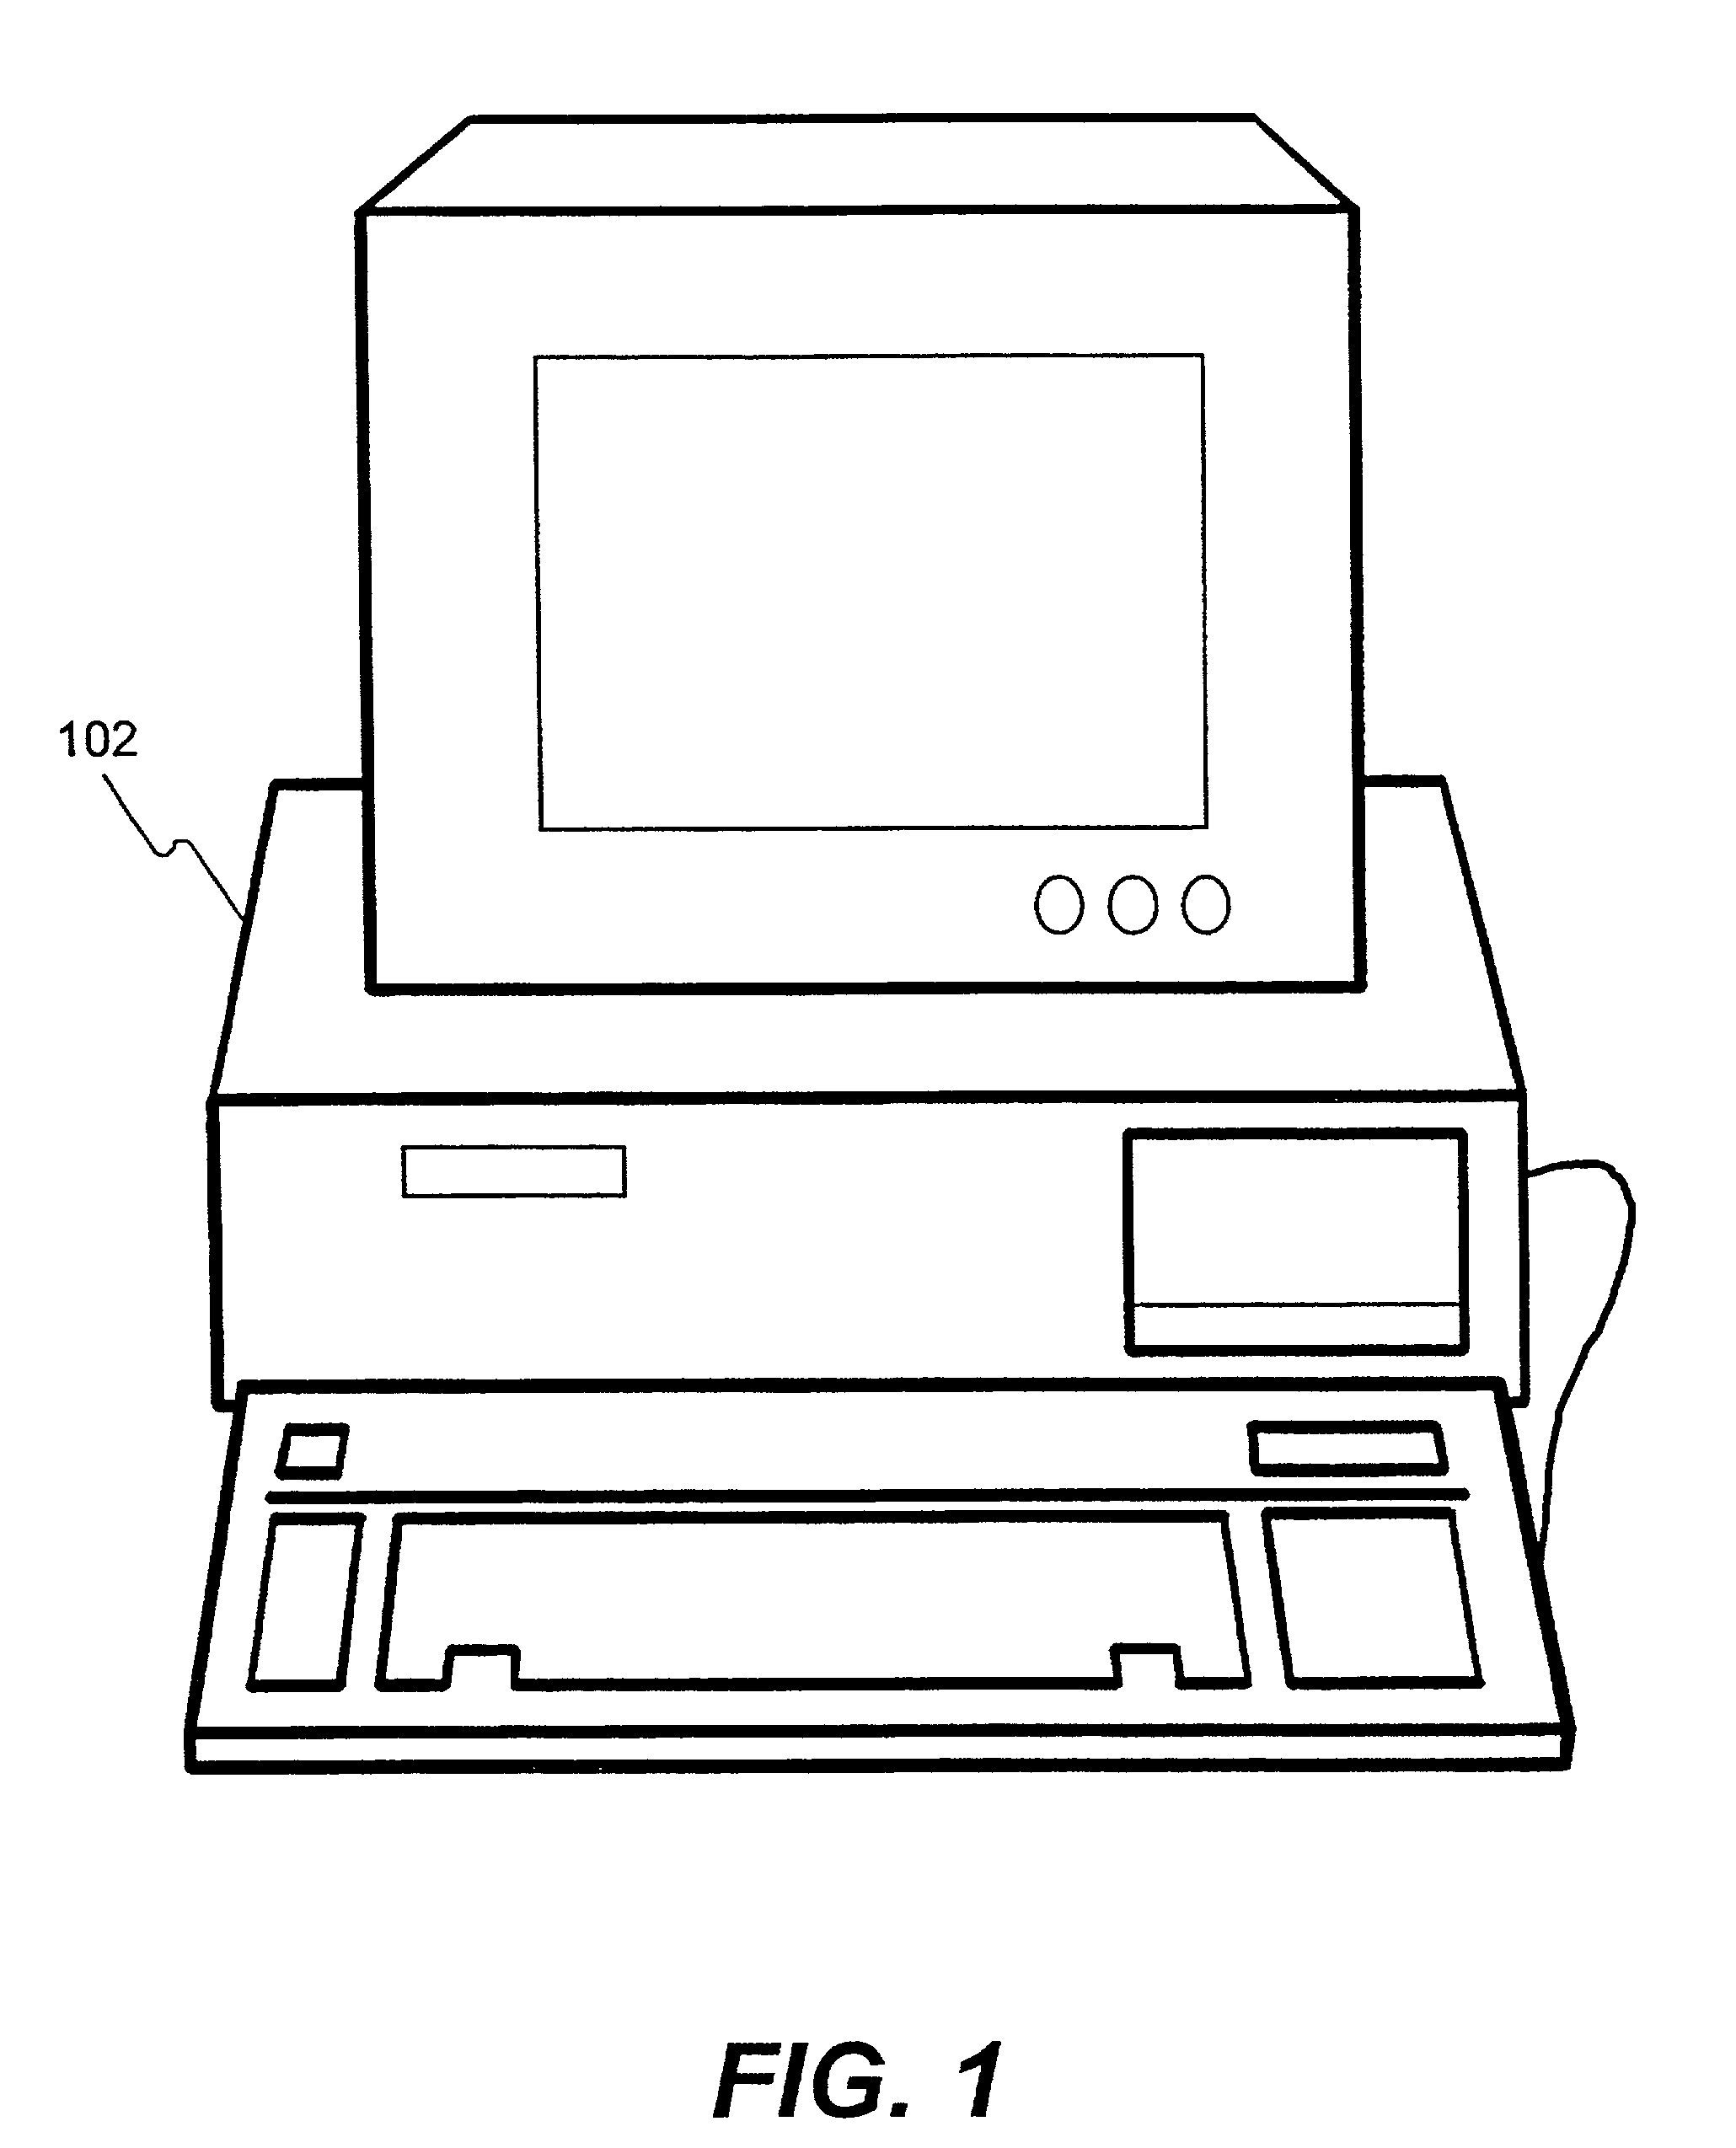 Apparatus and methods of visualizing numerical benchmarks